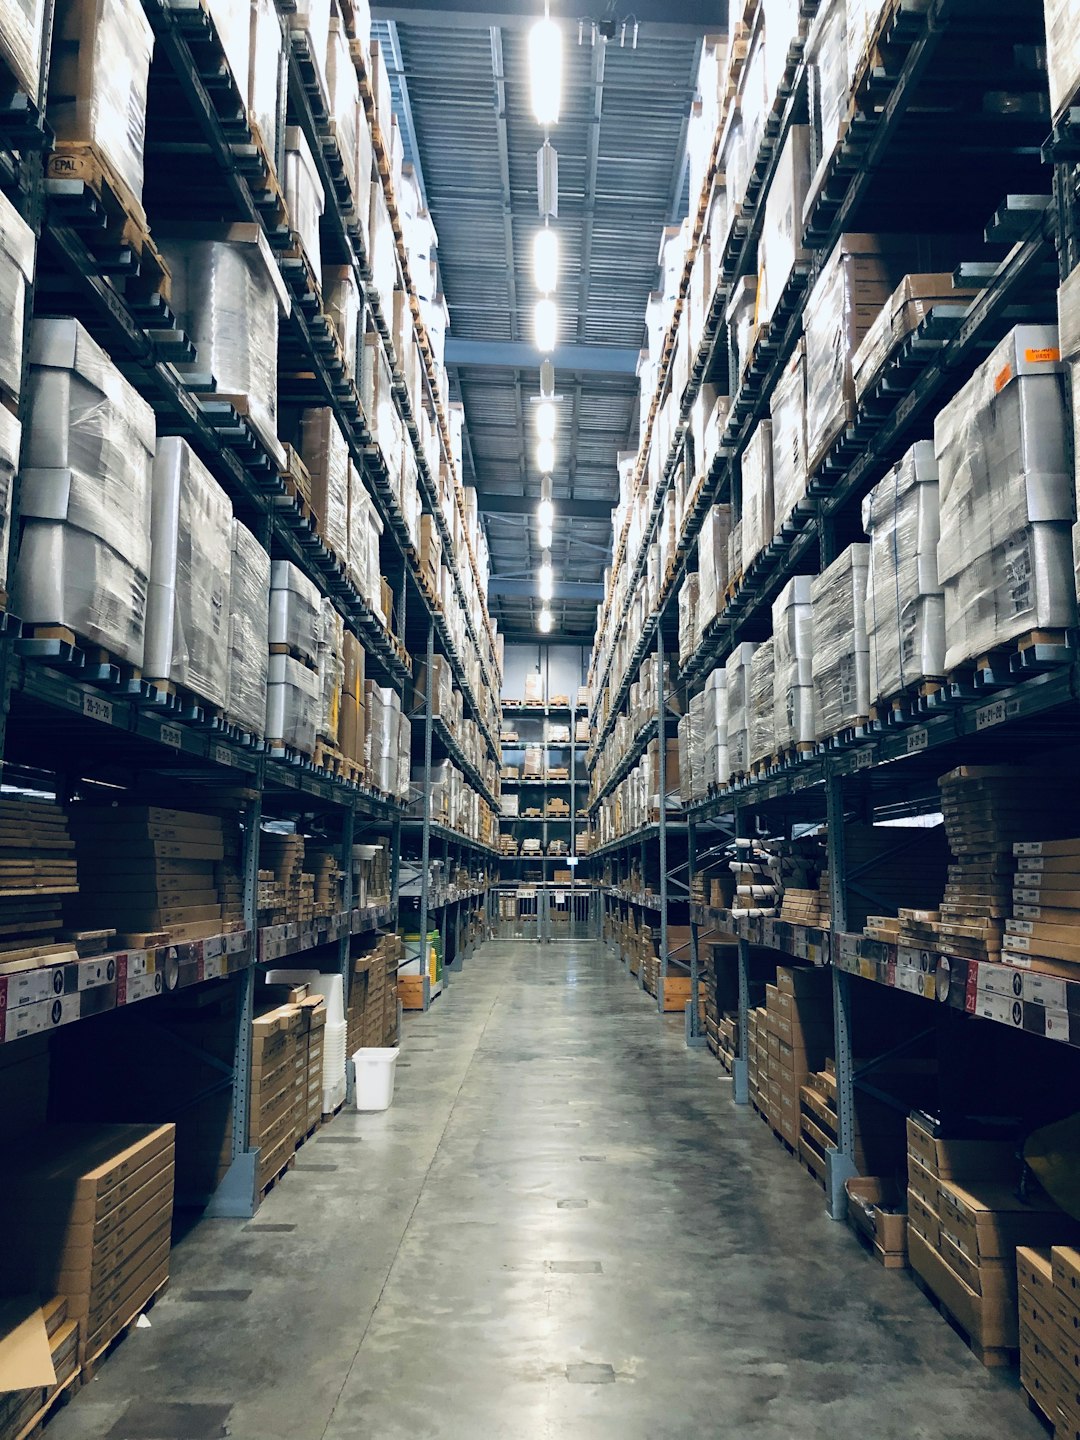 27+ Warehouse Pictures | Download Free Images on Unsplash